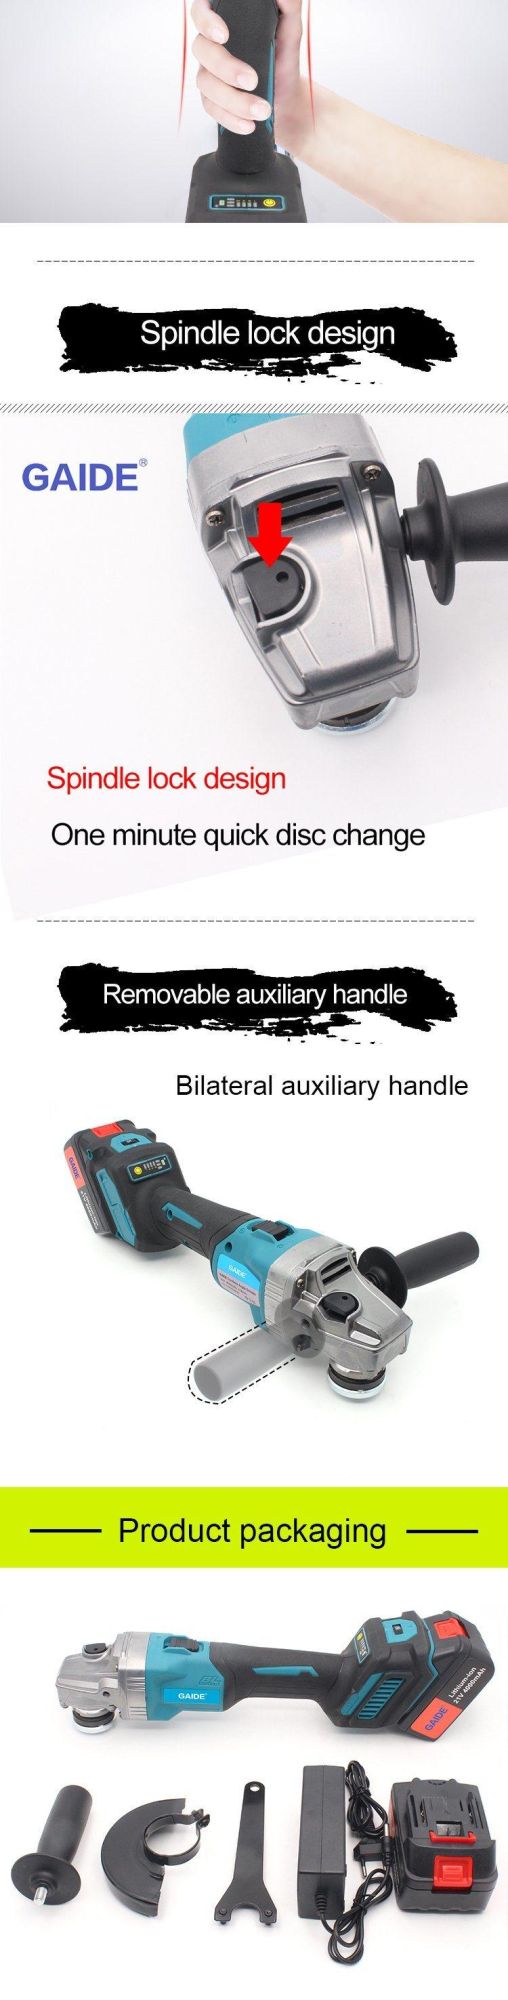 Cordless Angle Grinder Mini Cutter with Min Speed and Max Speed Change